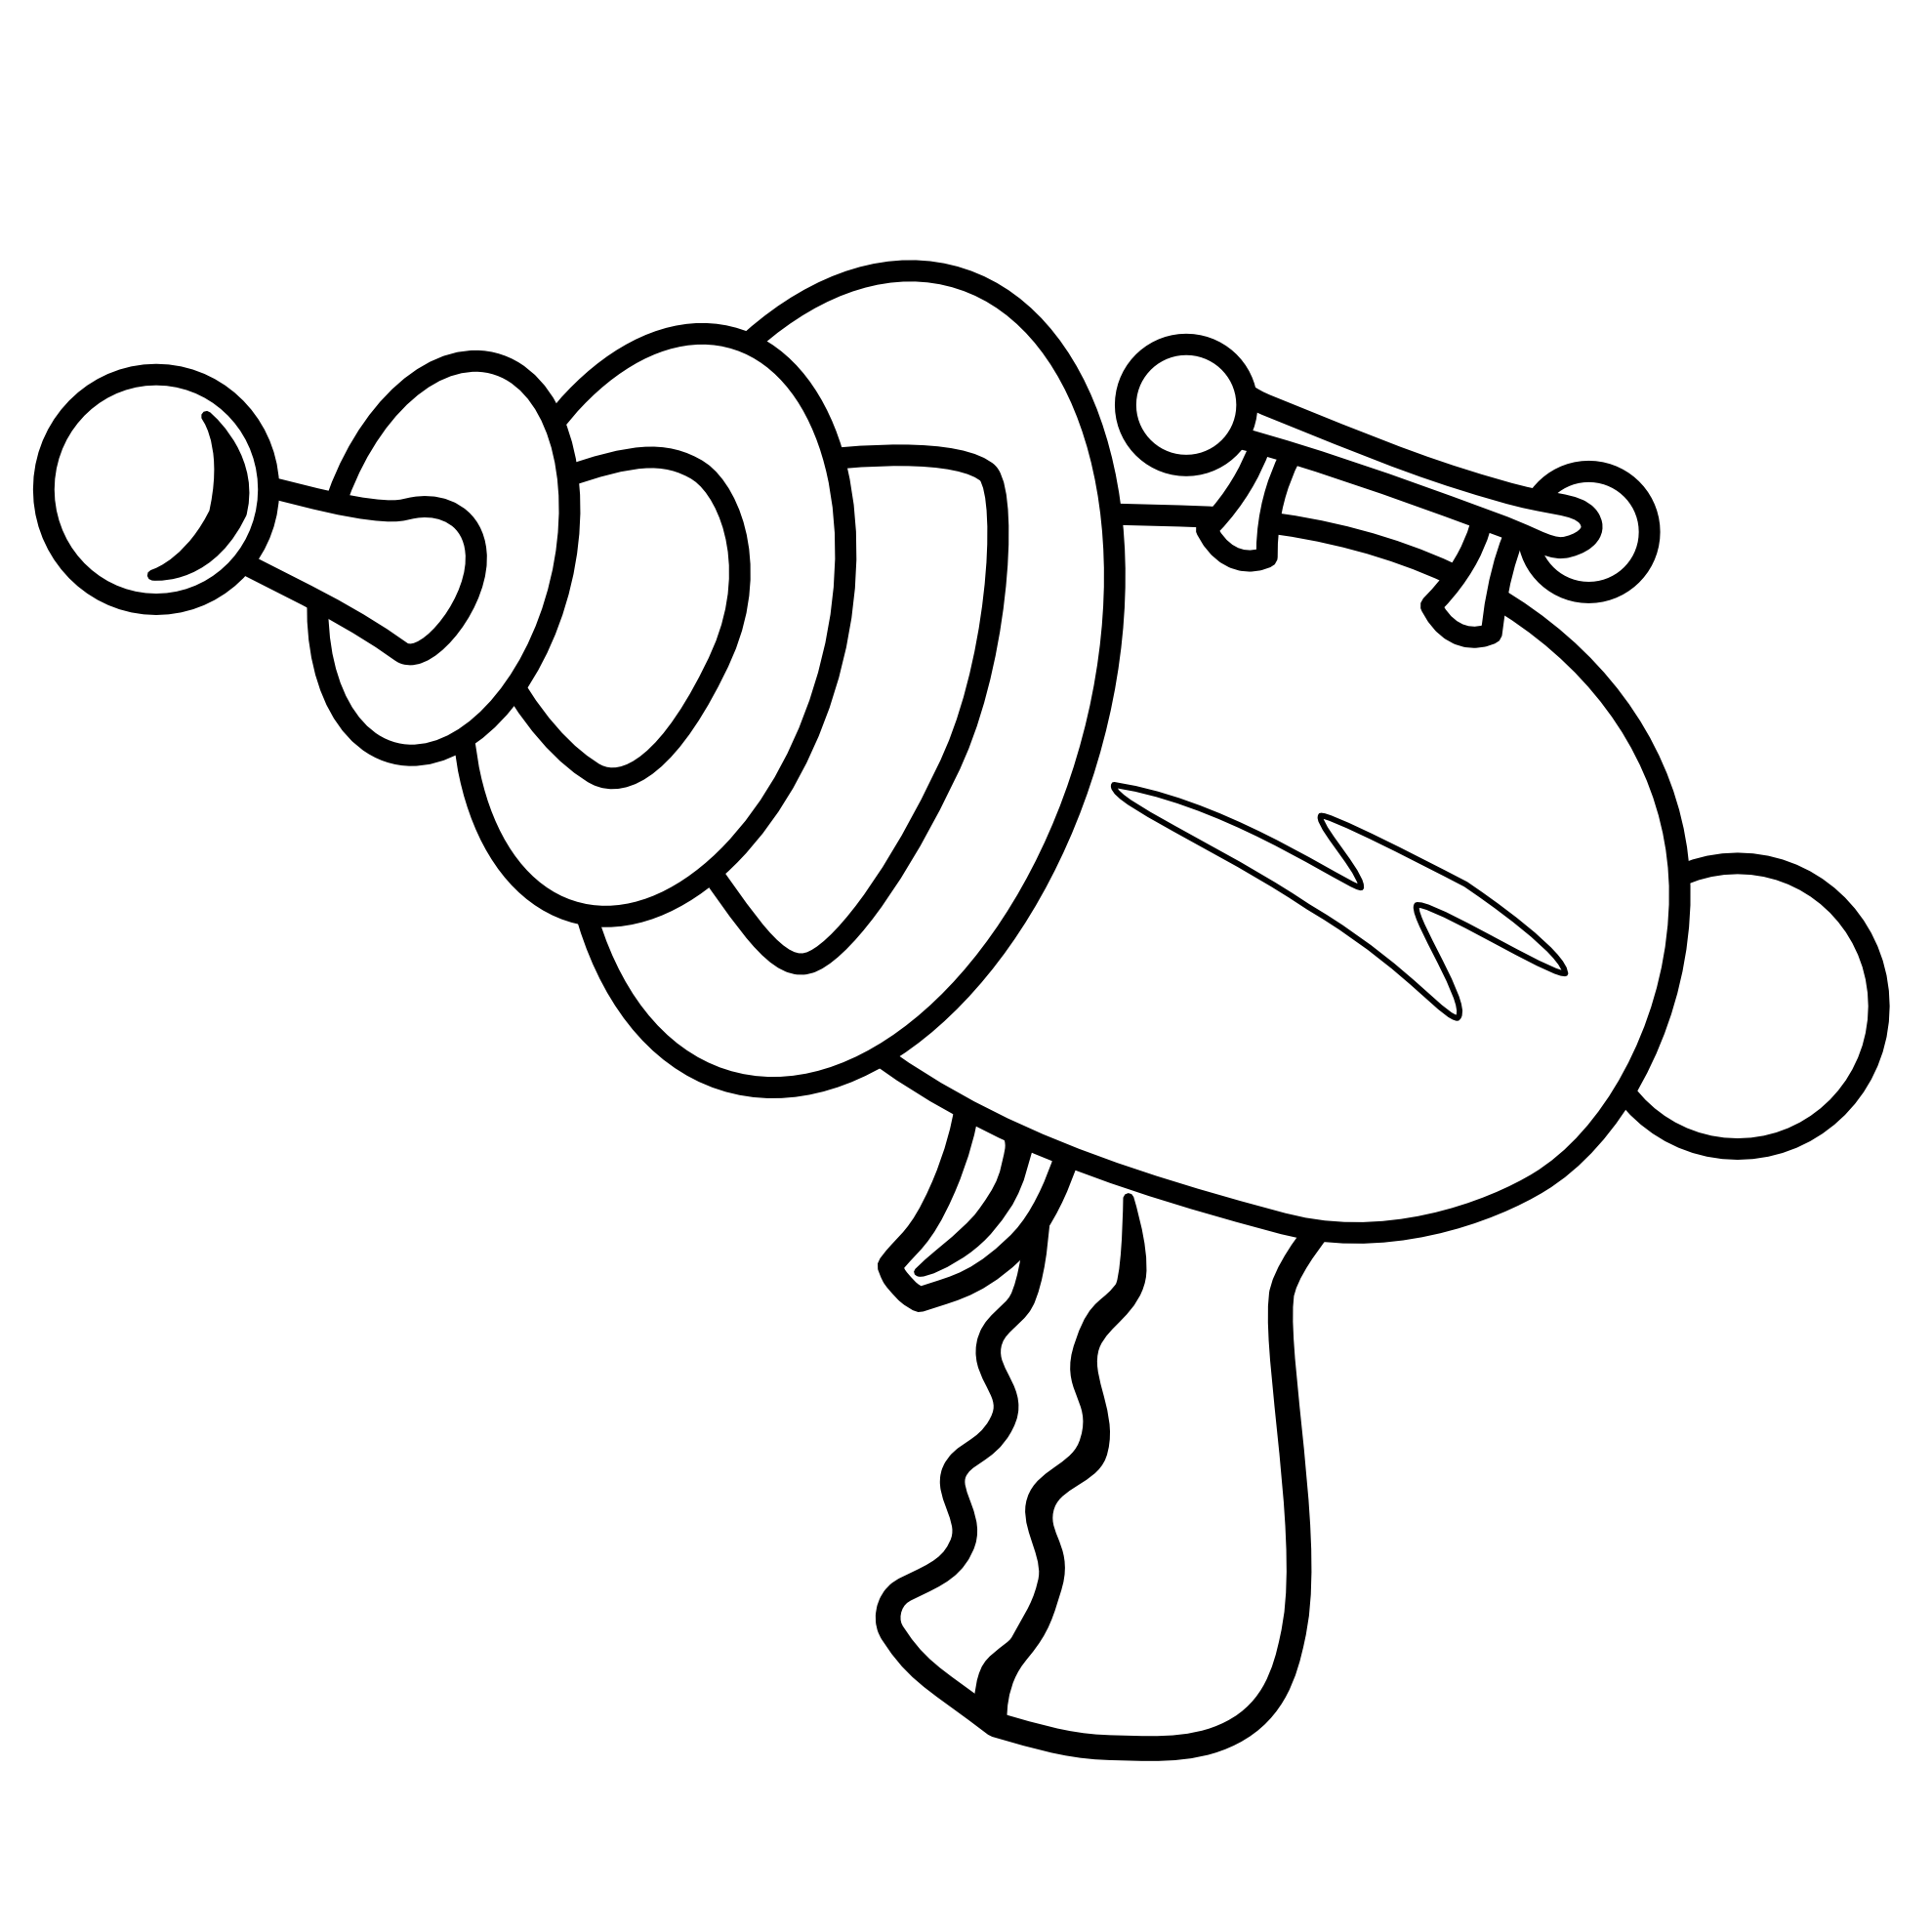 Gun black and white. Paintball clipart shooter